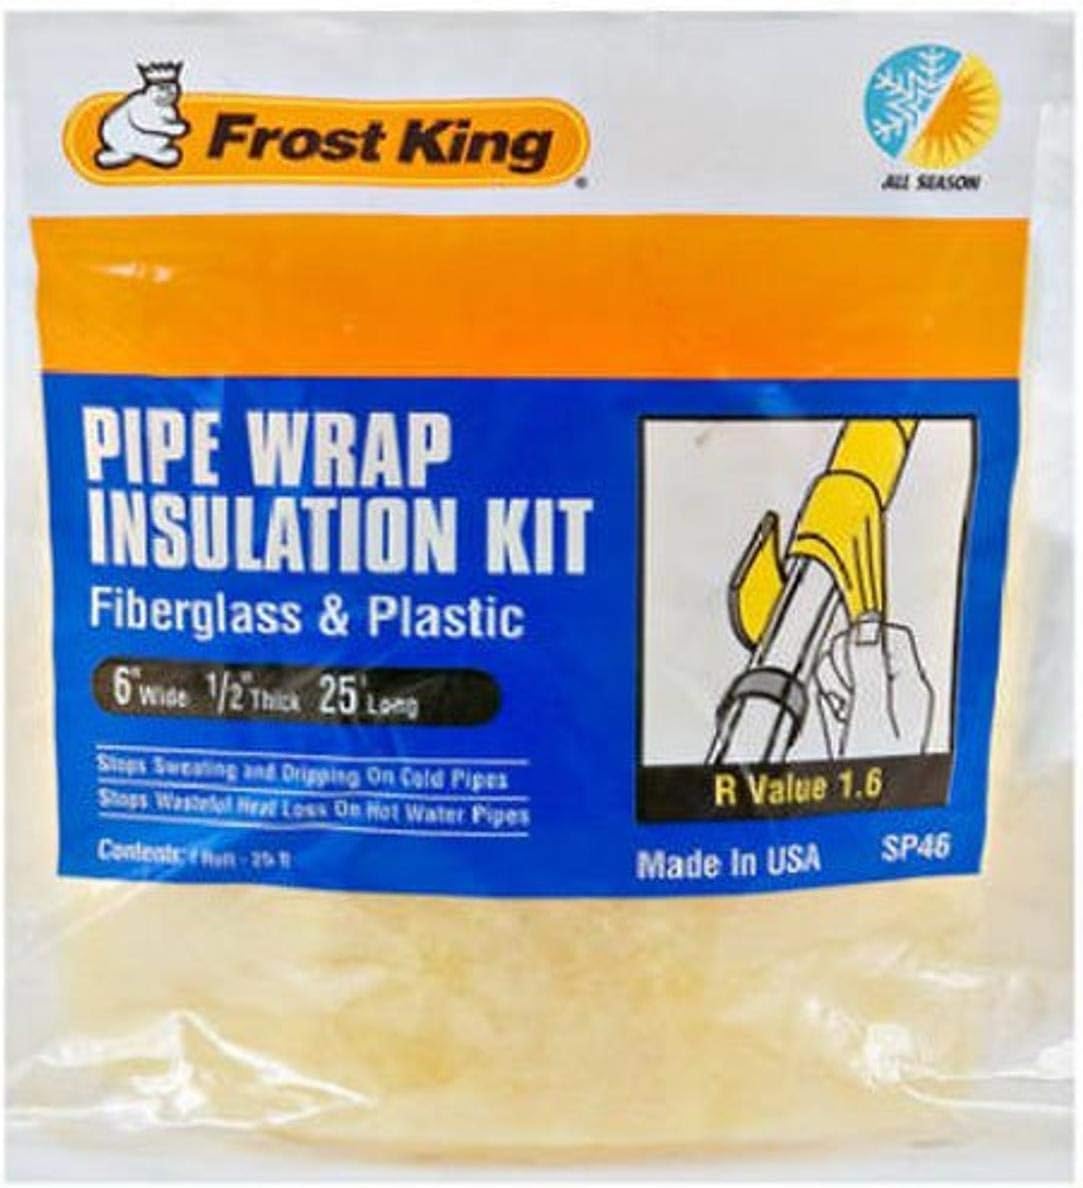 Thermwell Products SP46 Fiberglass Pipe Insulation Kit
